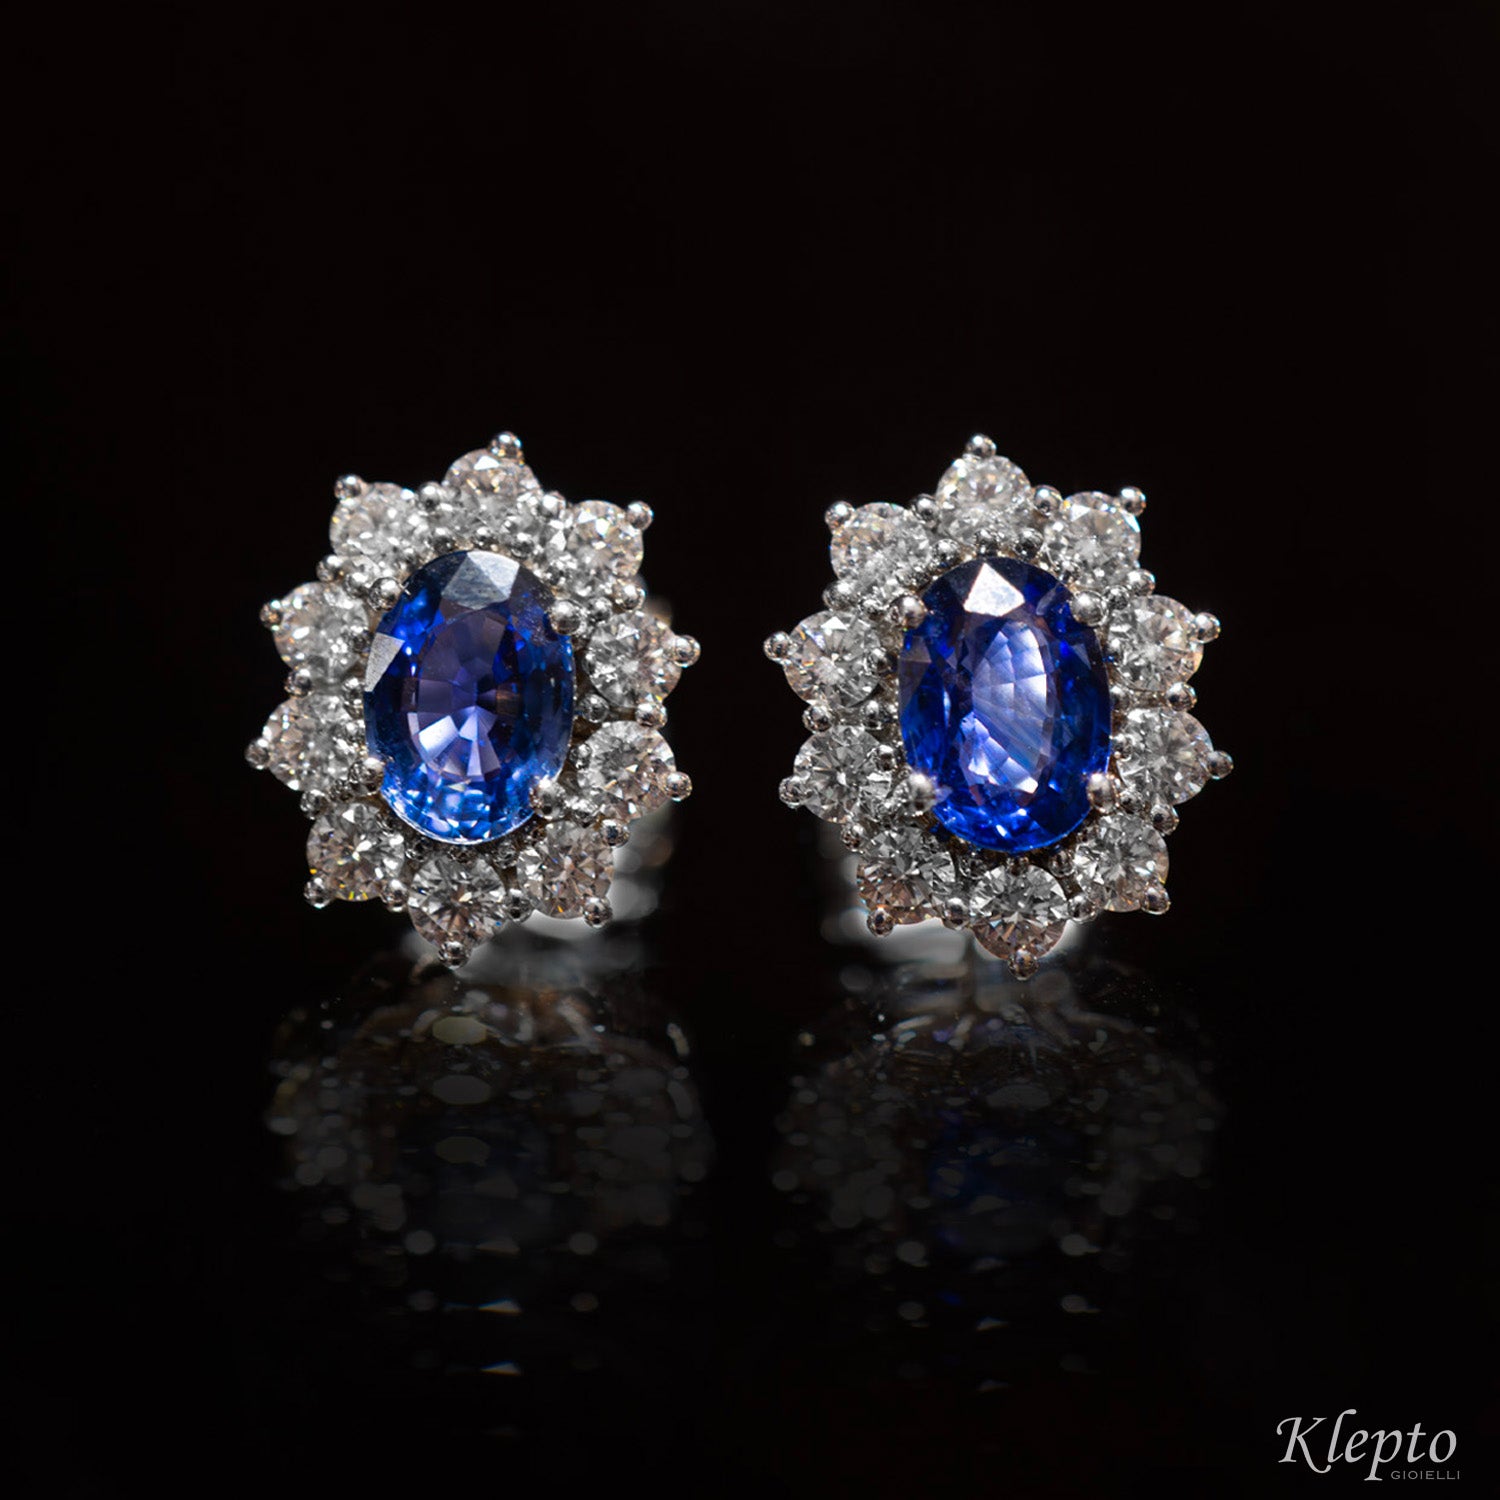 White gold lobe earrings with Sapphires and Diamonds